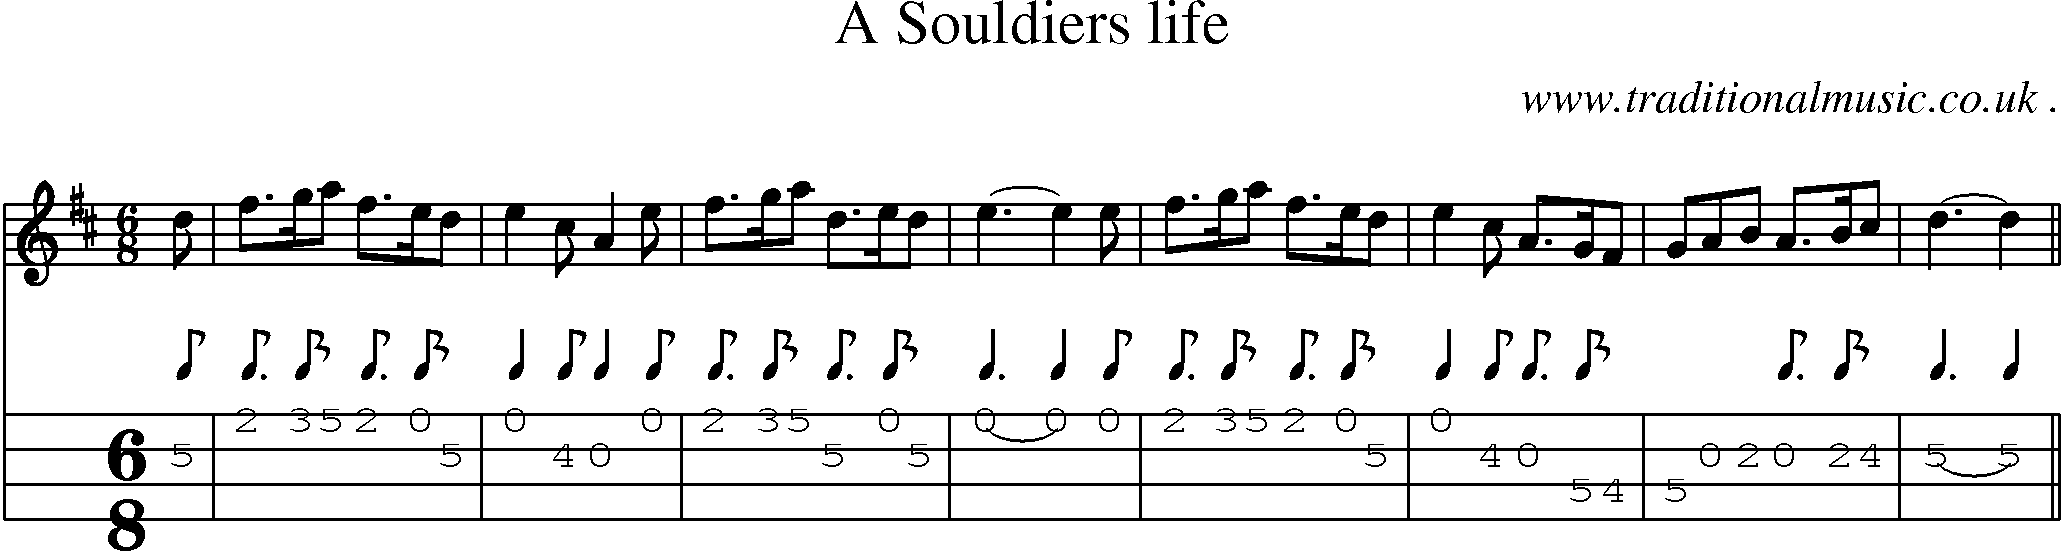 Sheet-music  score, Chords and Mandolin Tabs for A Souldiers Life